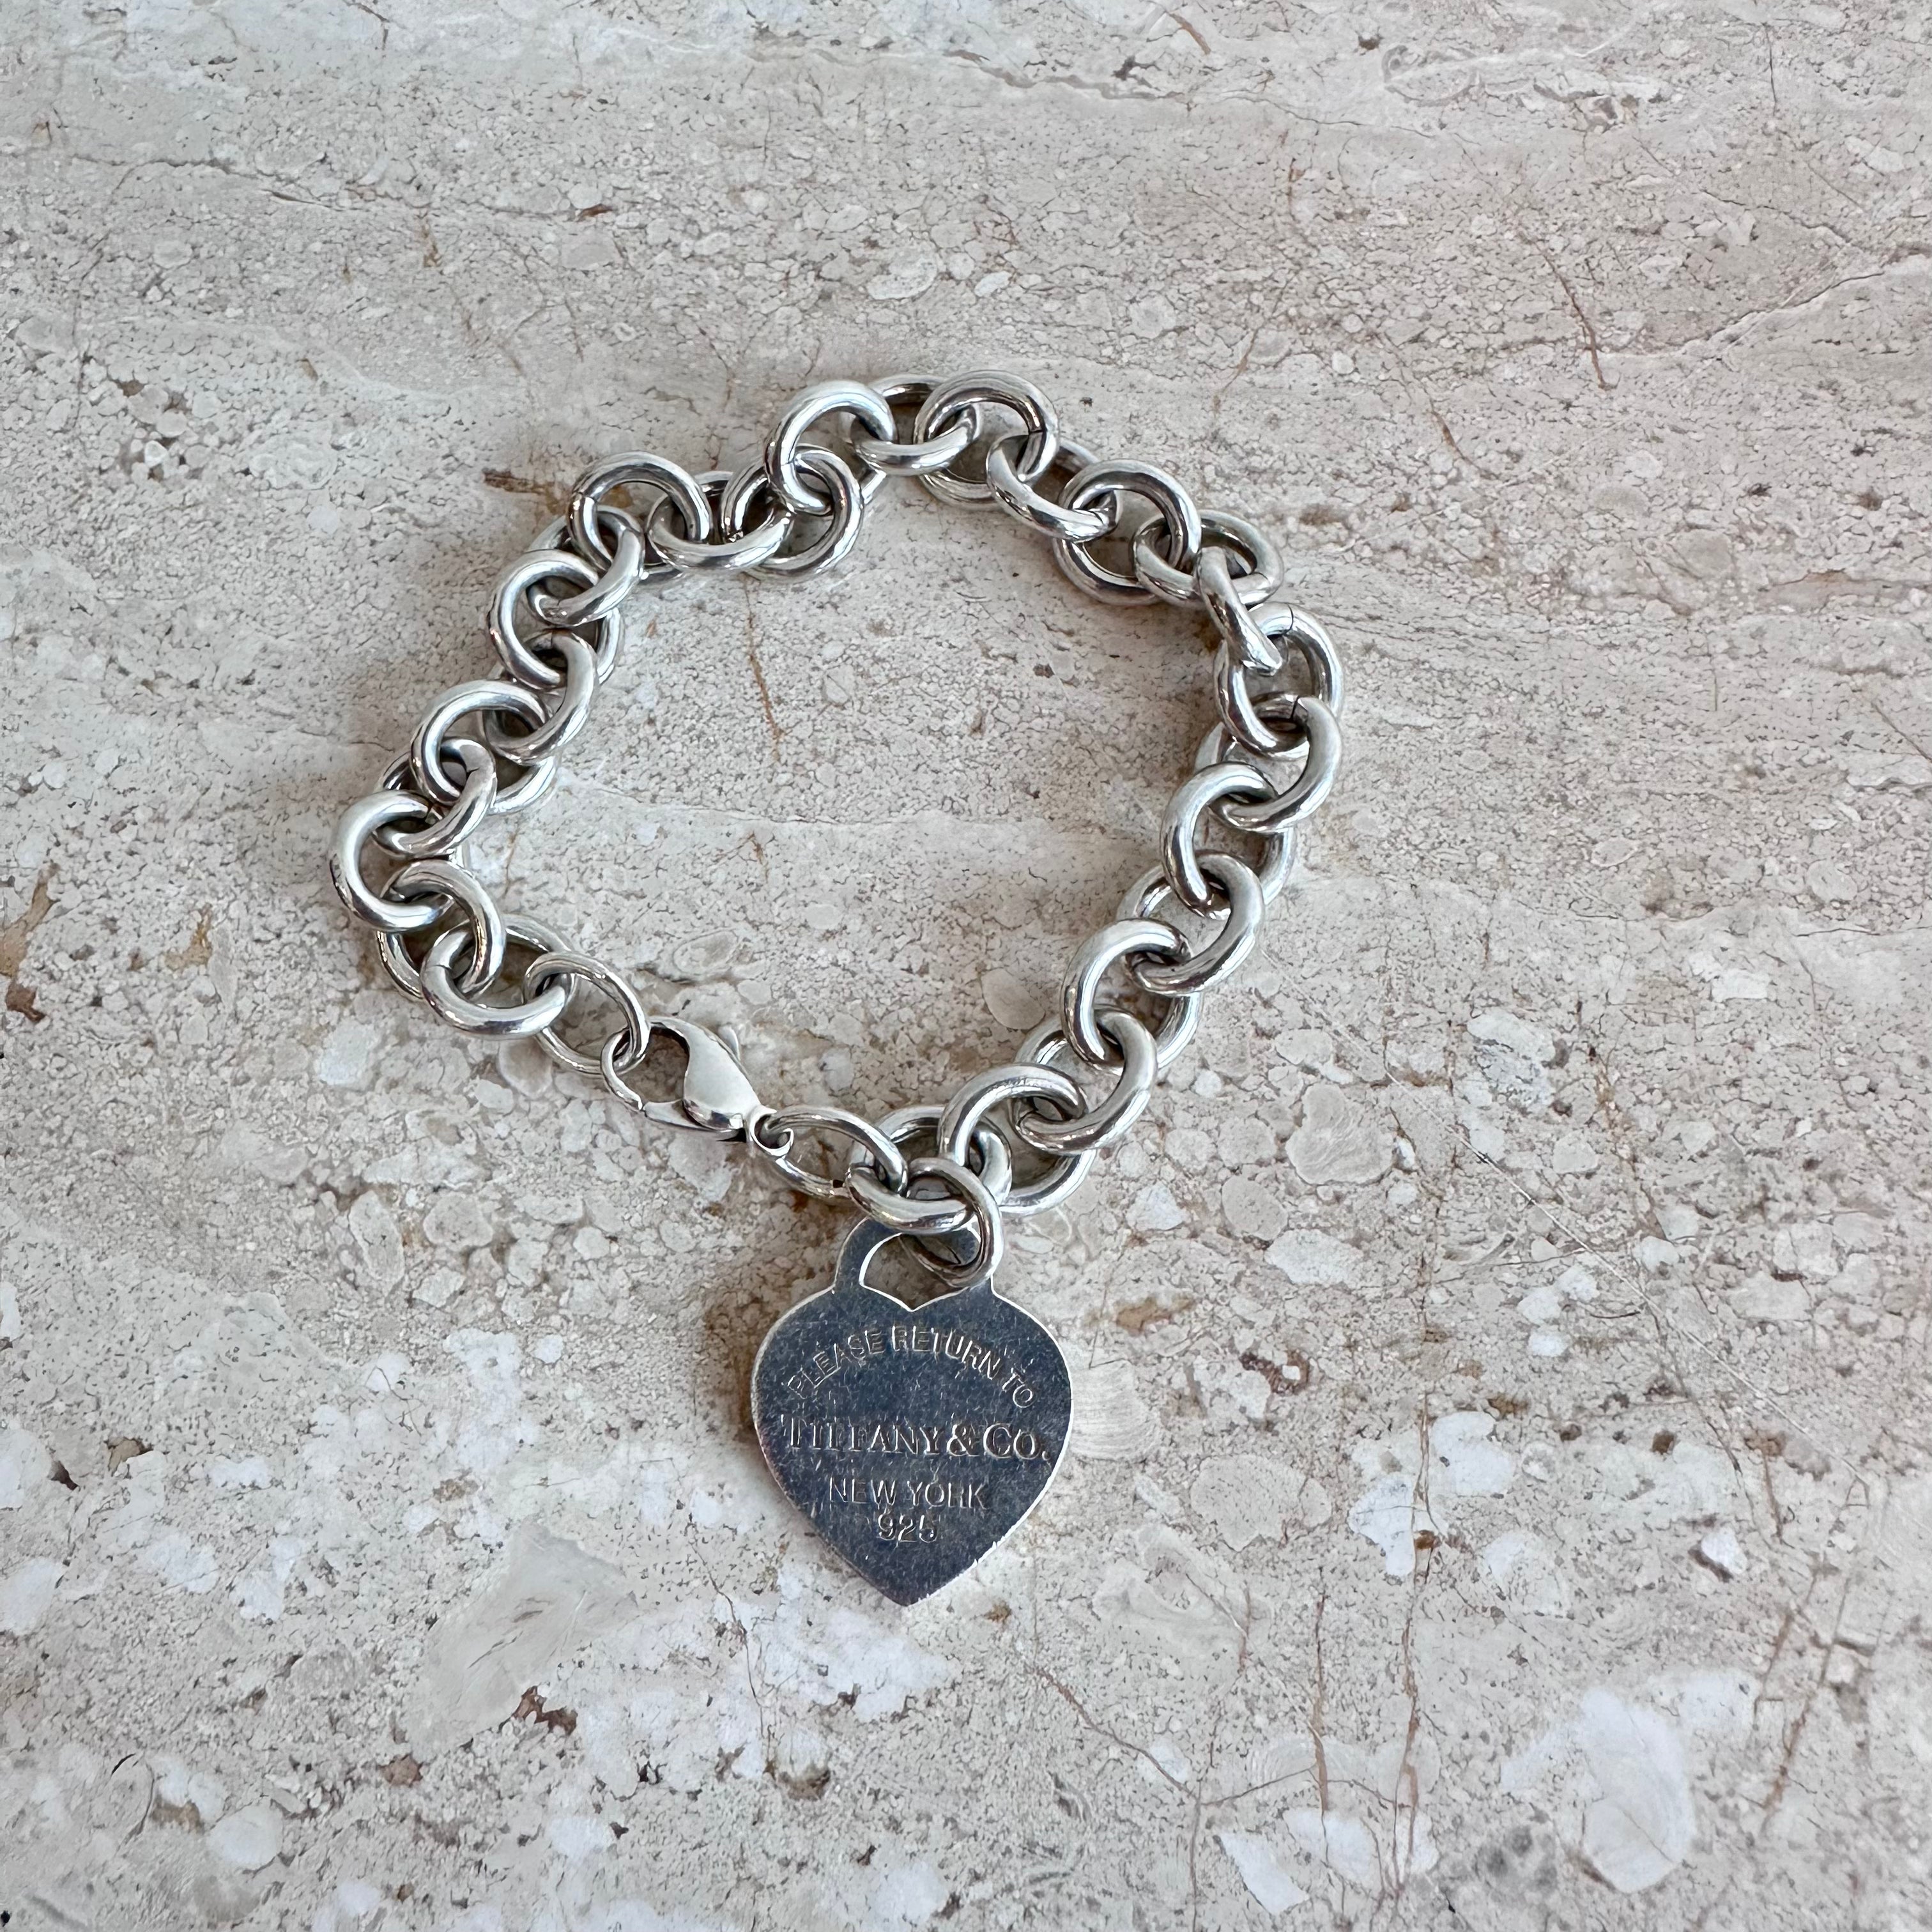 Pre-Owned TIFFANY & CO 925 Sterling Silver Heart Tag Bracelet #2